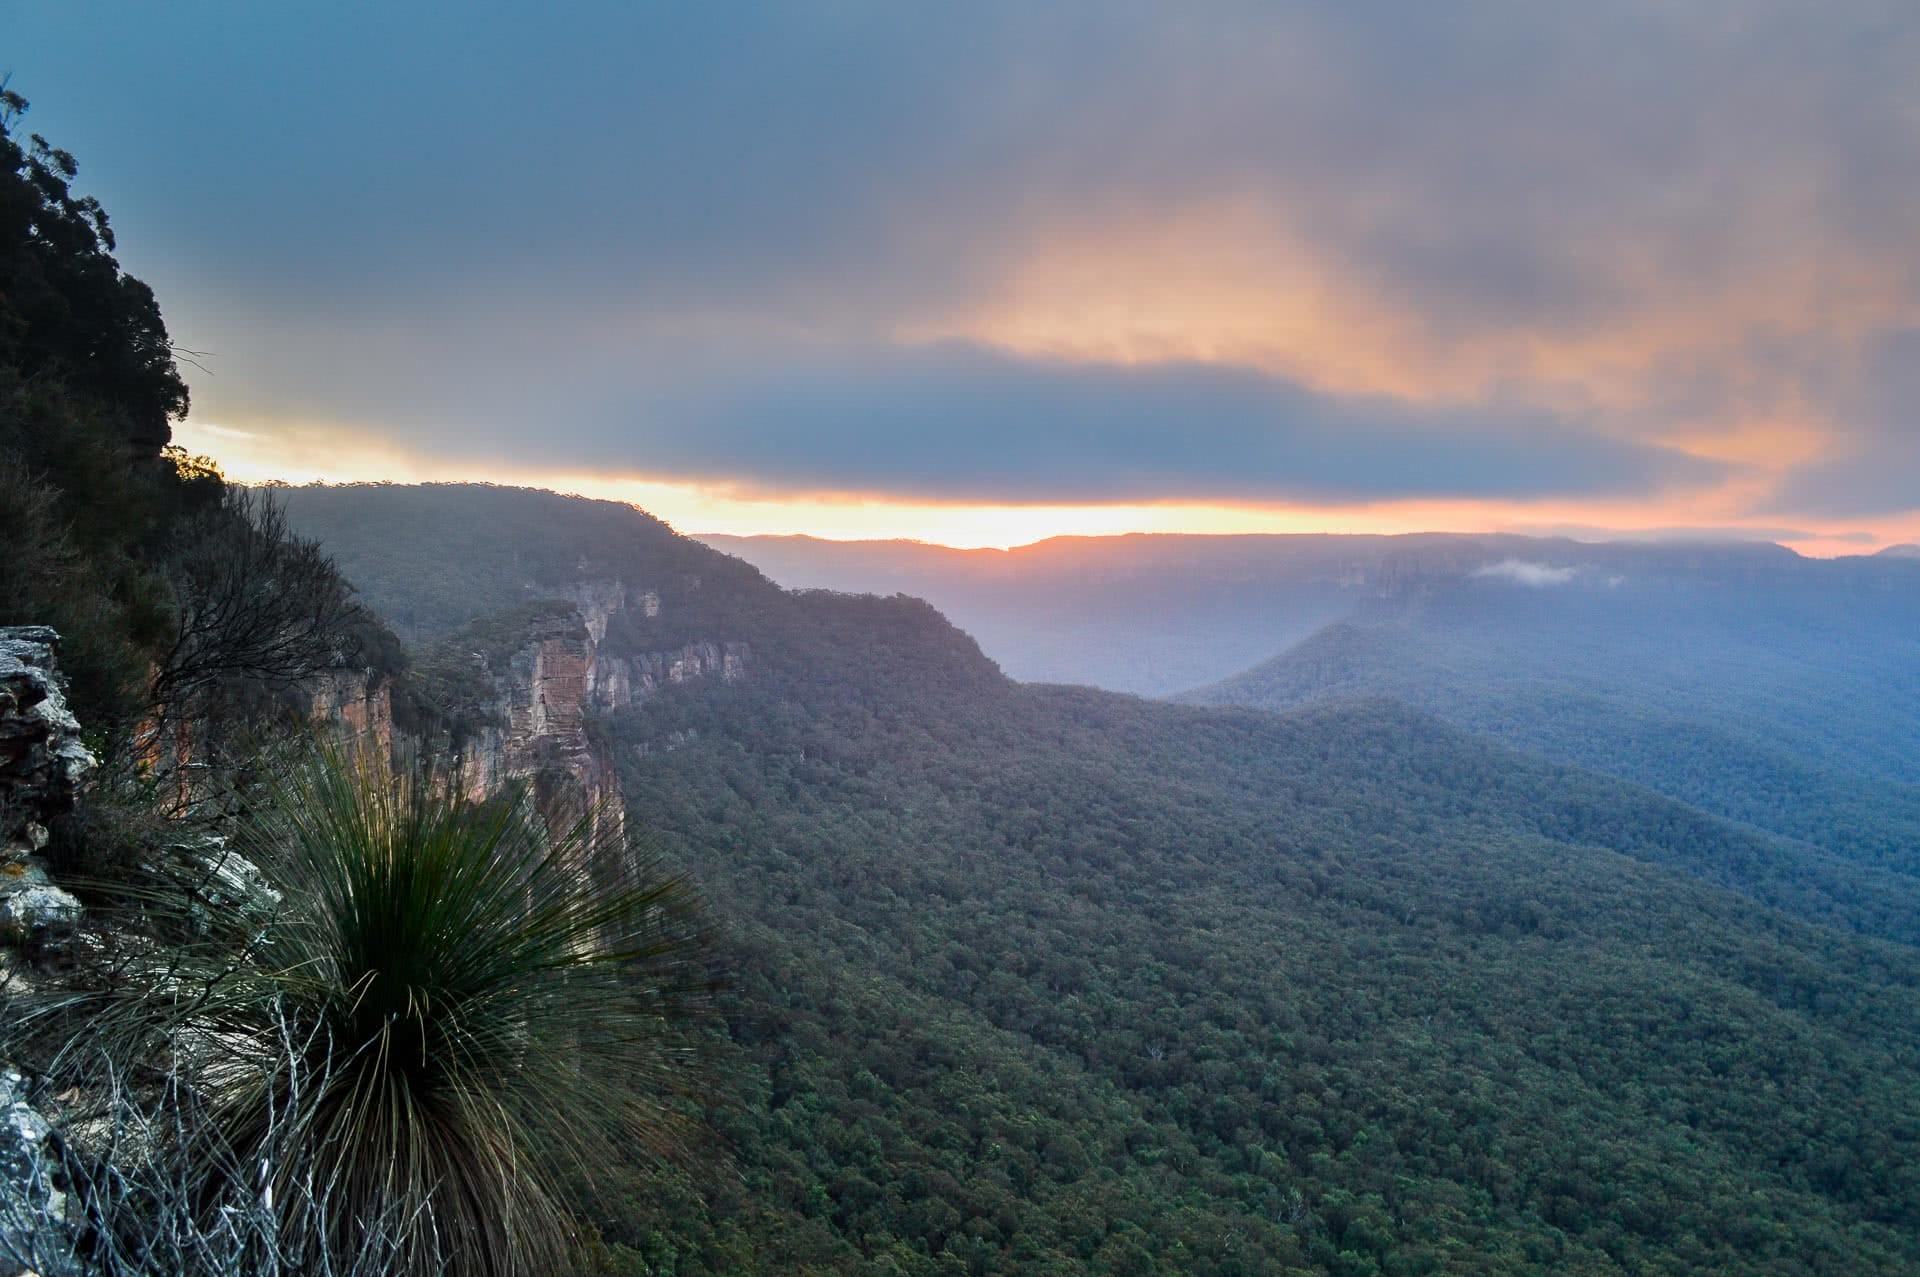 Mt Solitary, overnight hikes, multi day hikes, photo by Tim ashelford, blue mountains, nsw, sunset, cliffs